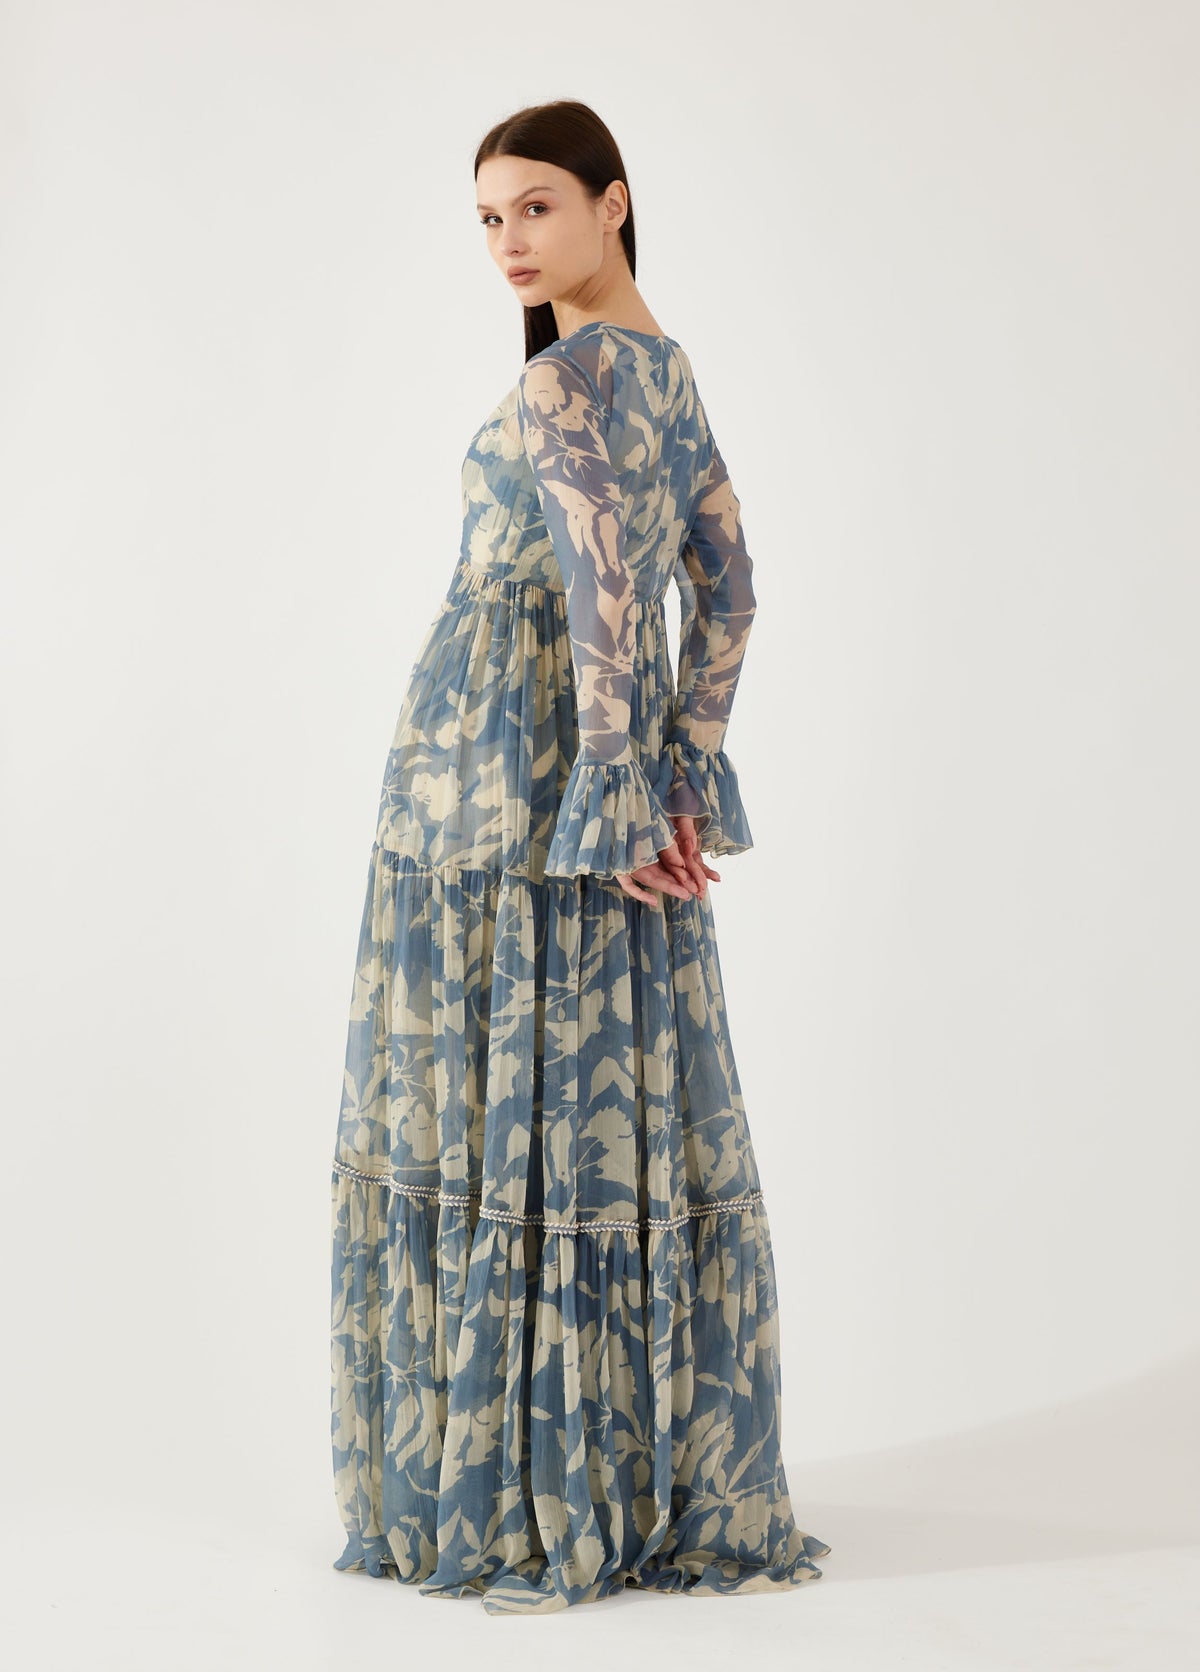 BLUE AND CREAM FLORAL CAPE